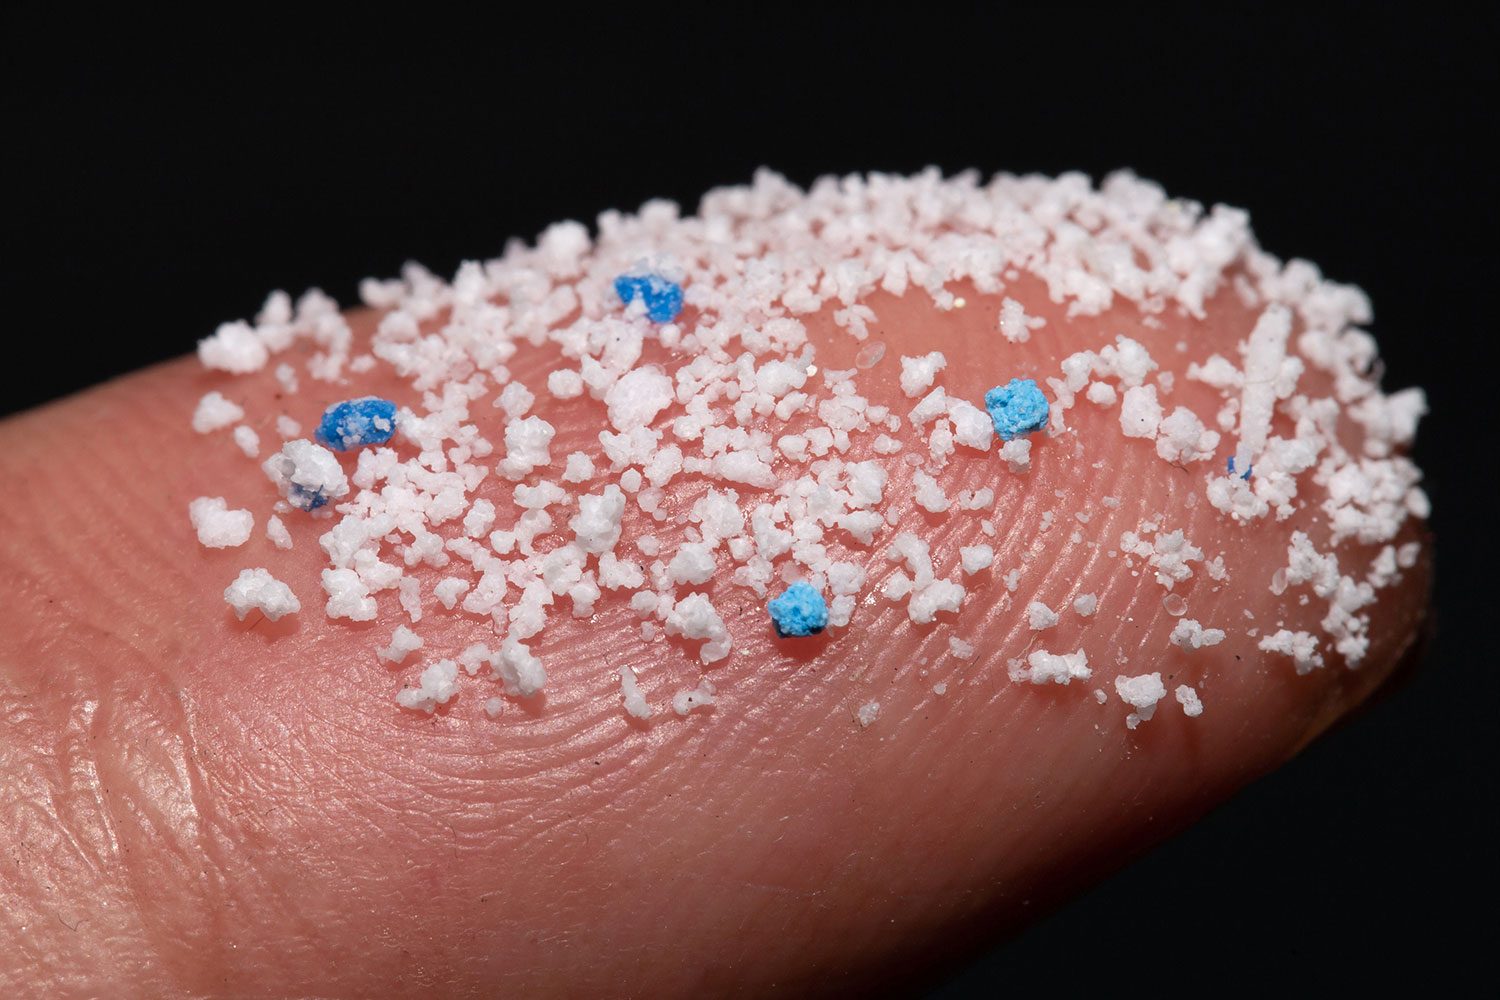 Small miiroplastic Pellets On The Finger on a black background